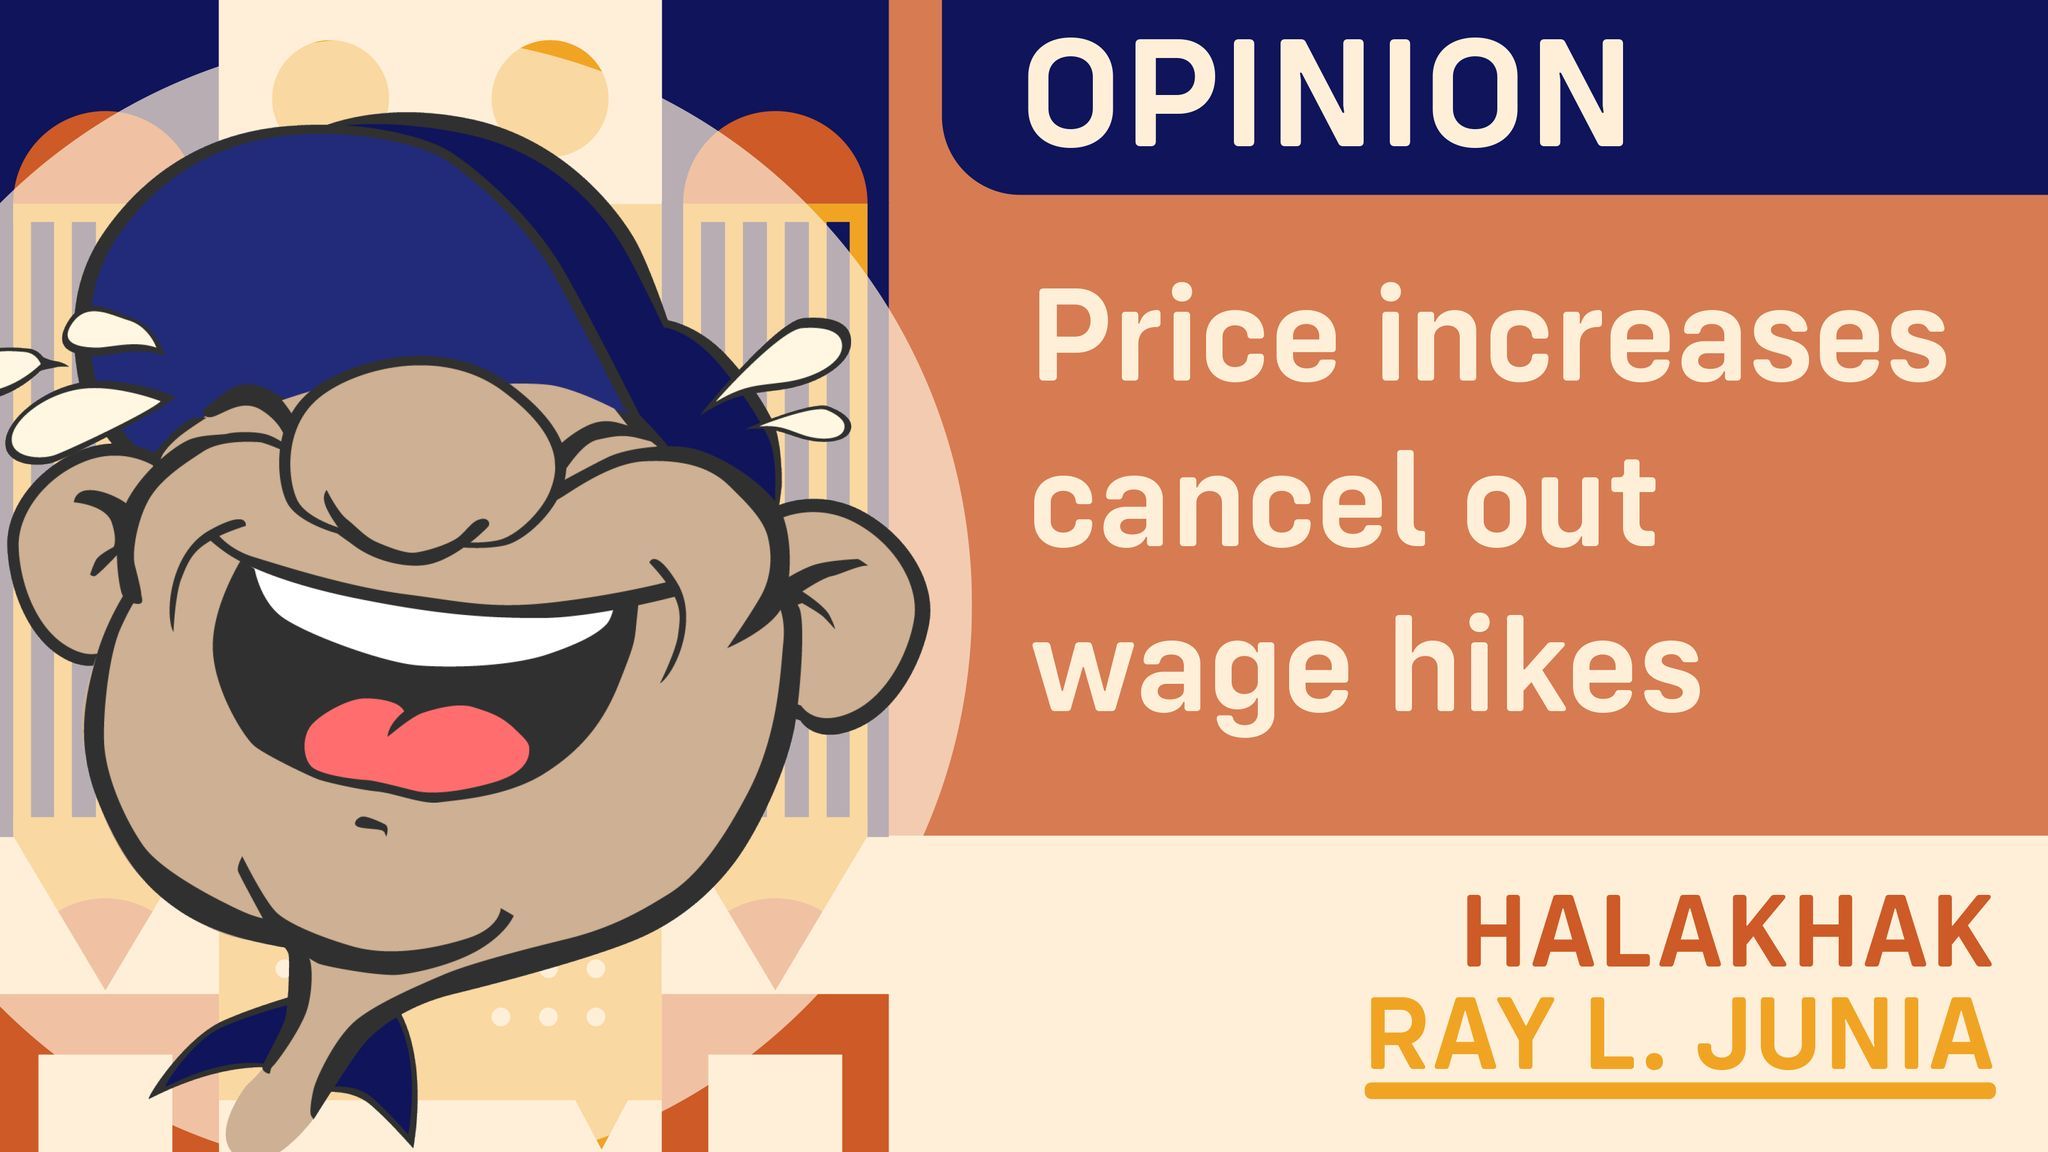 Price increases cancel out wage hikes